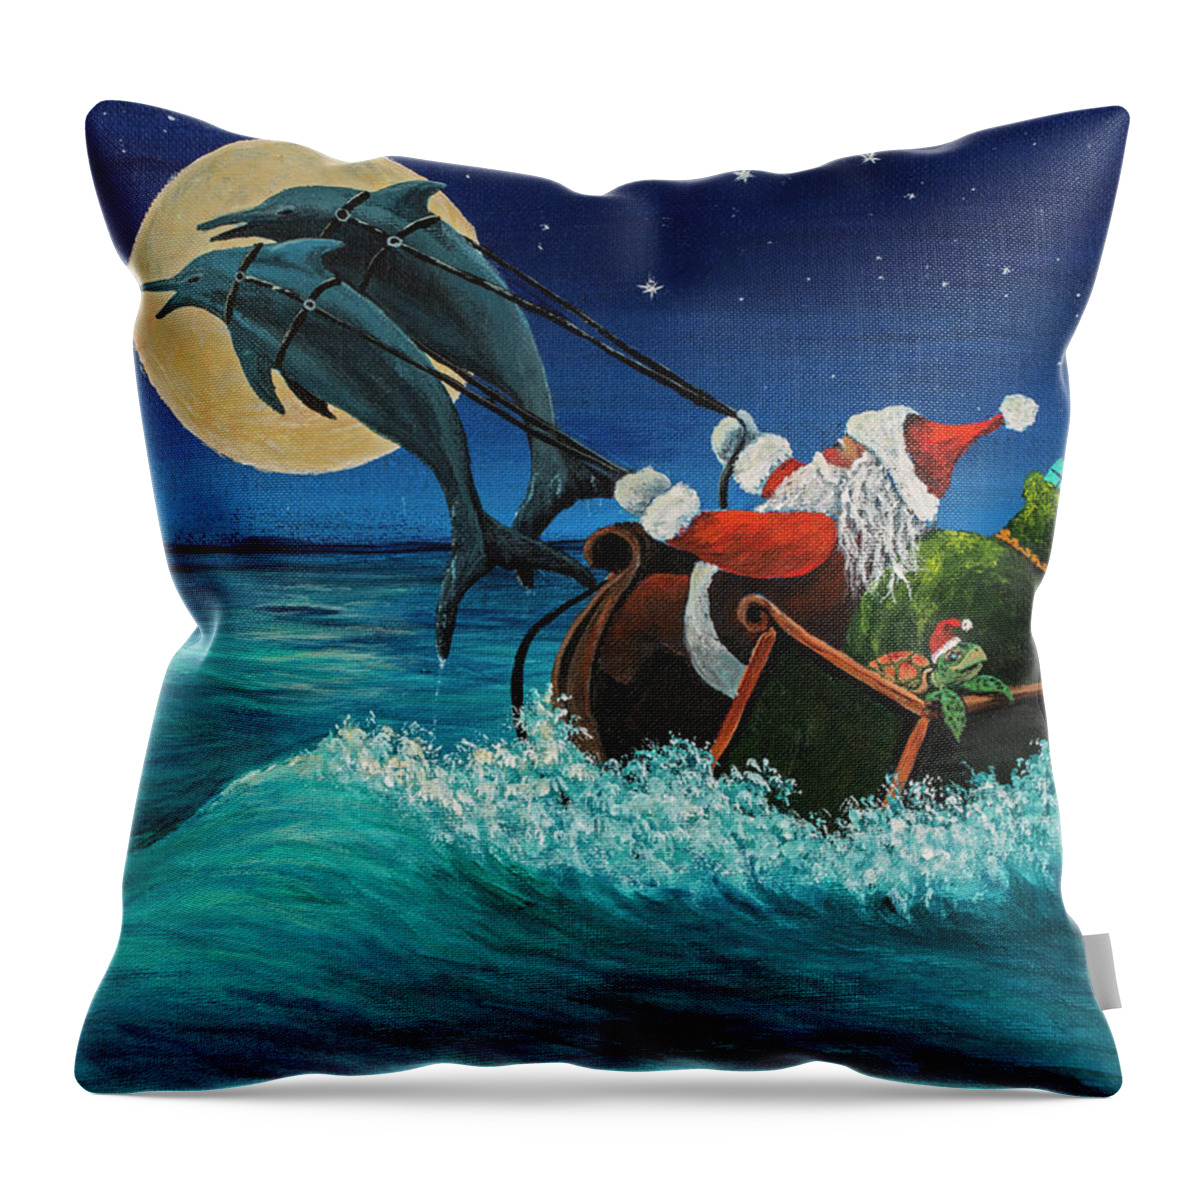 Santa Throw Pillow featuring the painting Riding The Waves With Santa by Darice Machel McGuire